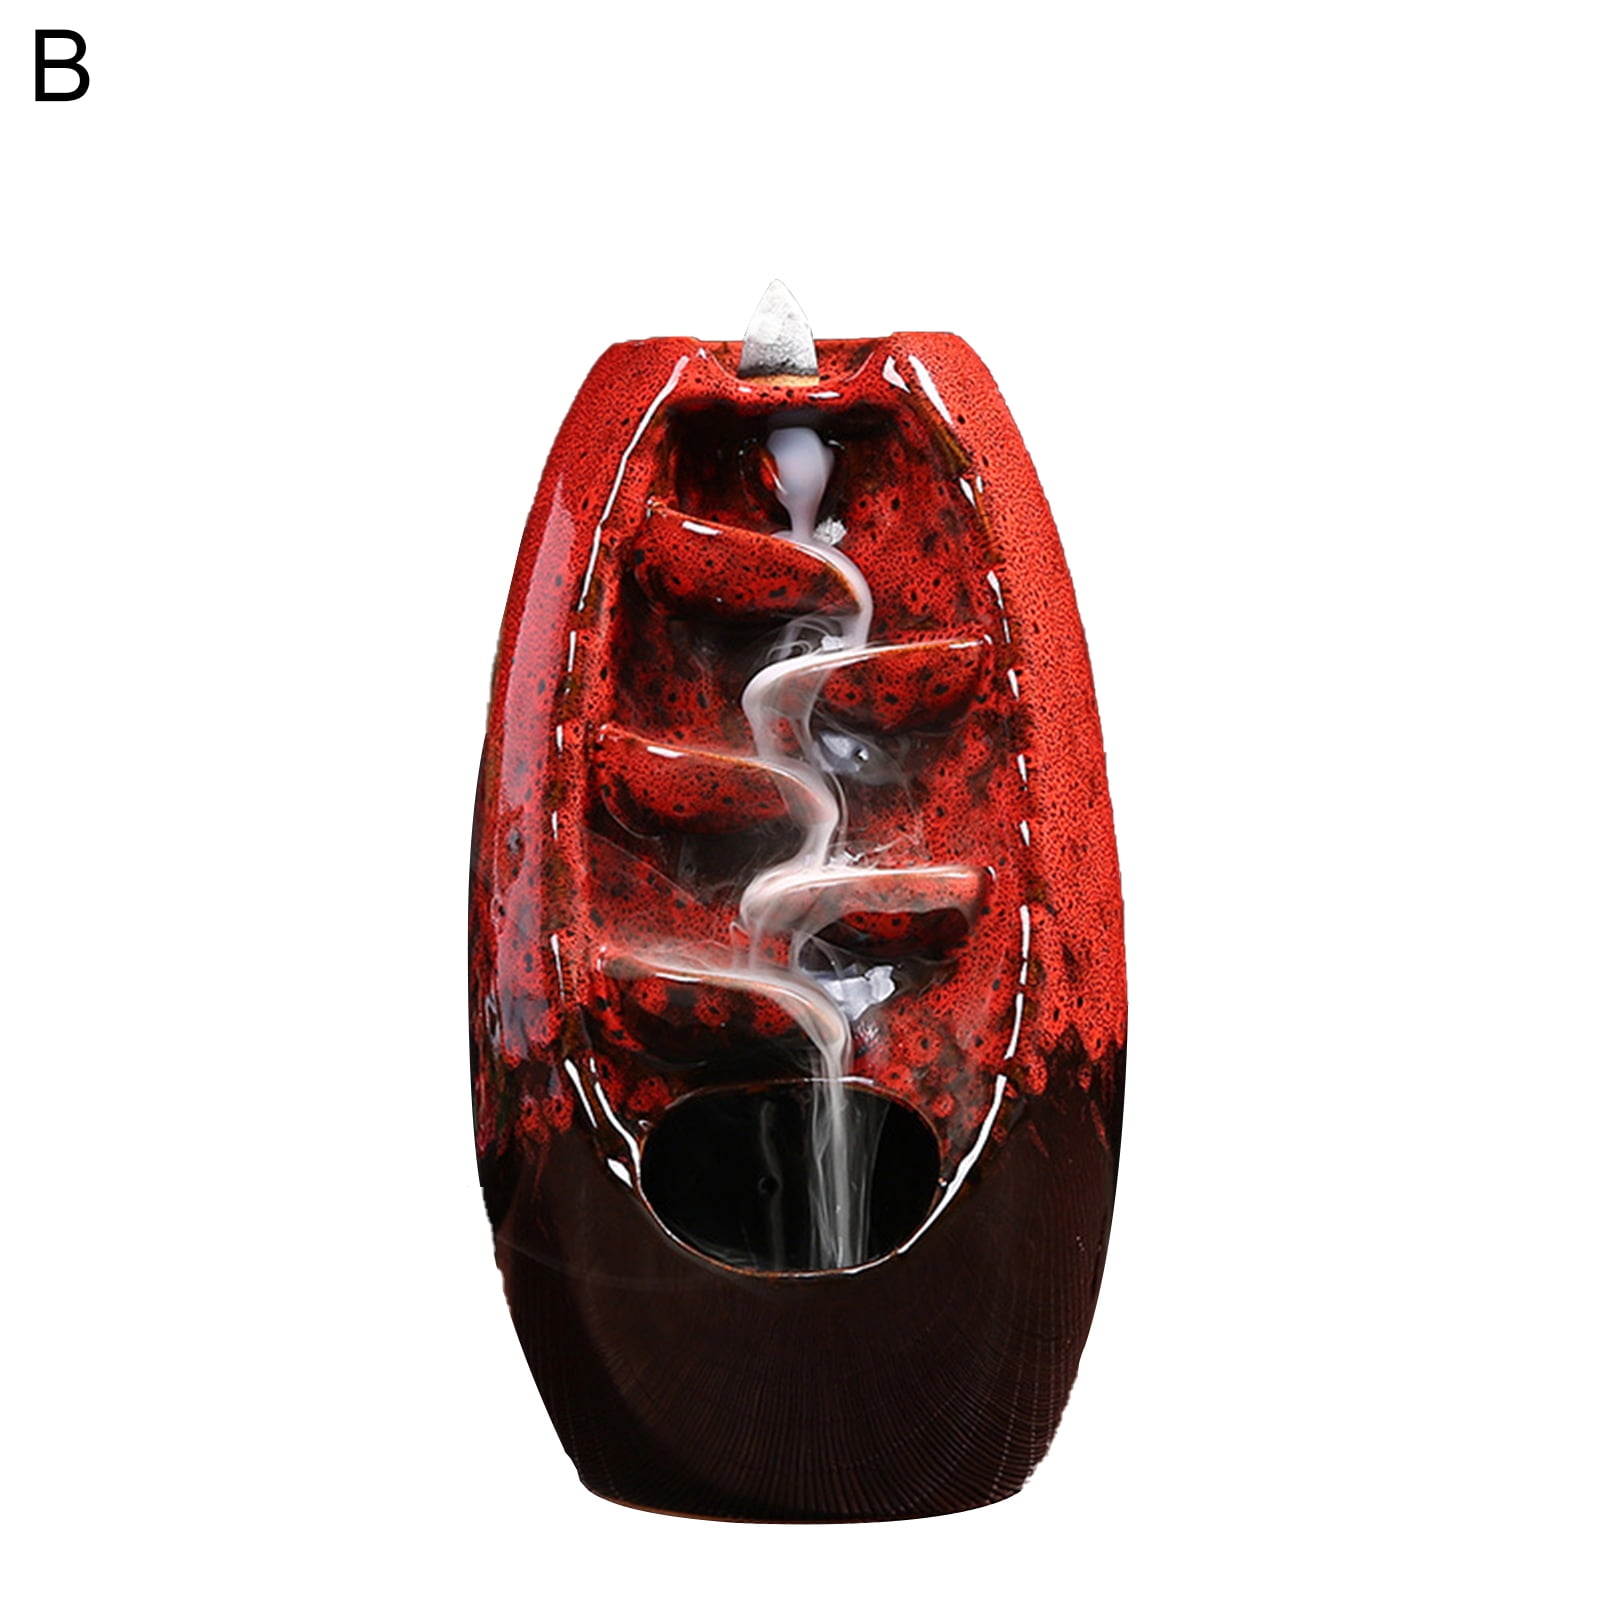 Waterfall Backflow Incense Burner Holder Ornament for Learning Work Yoga Tre Details about   DI 